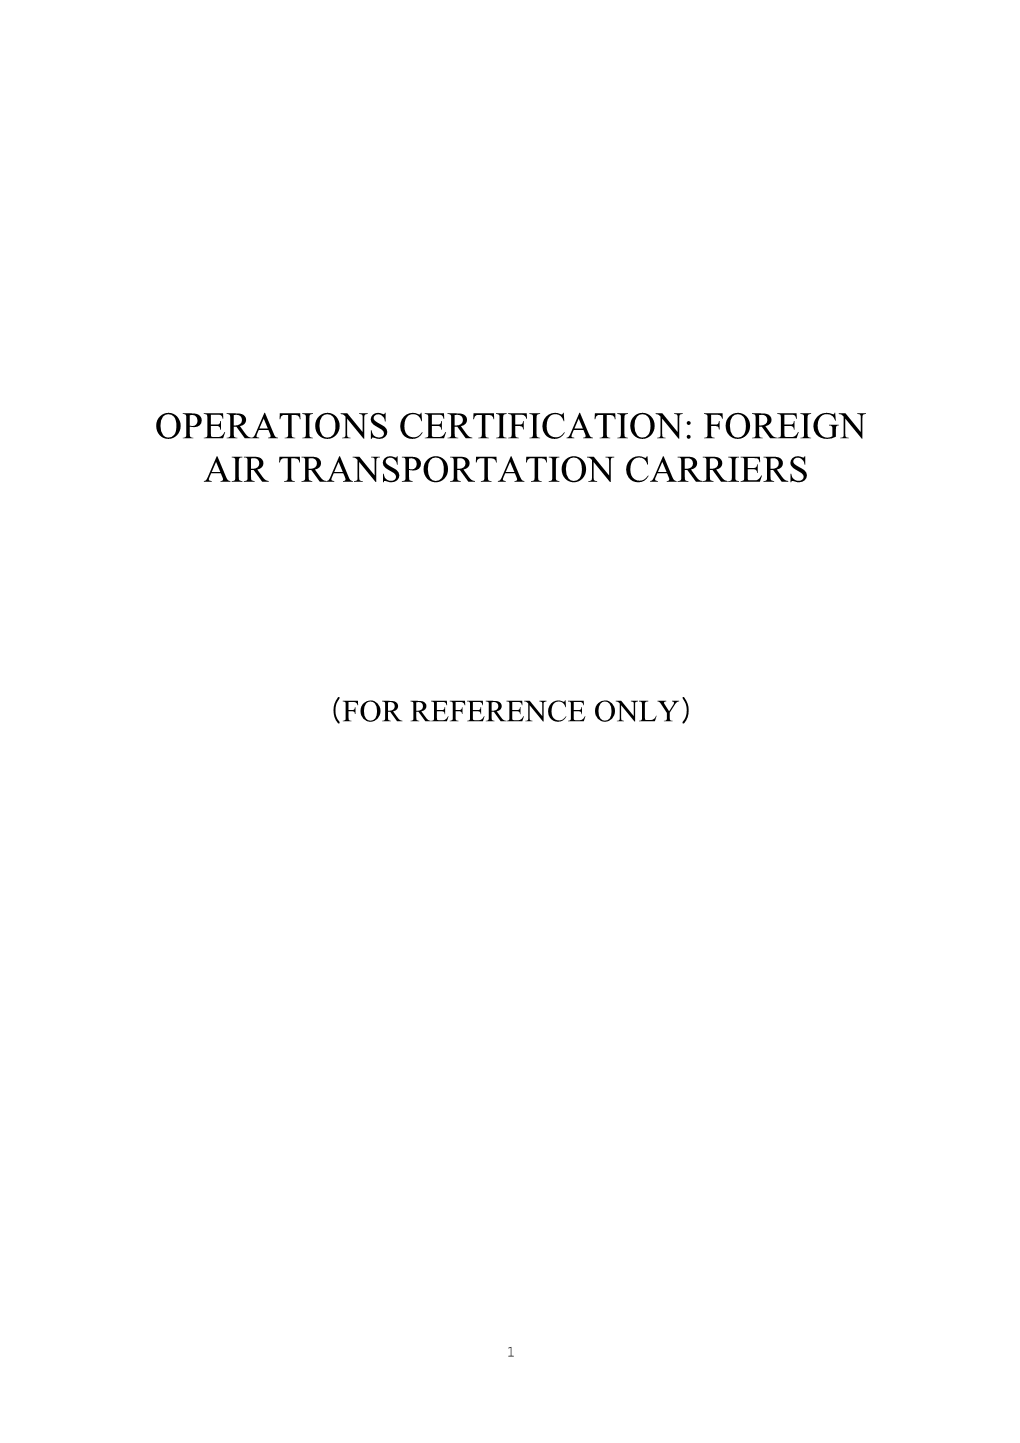 Operations Certification: Foreign Air Transportation Carriers